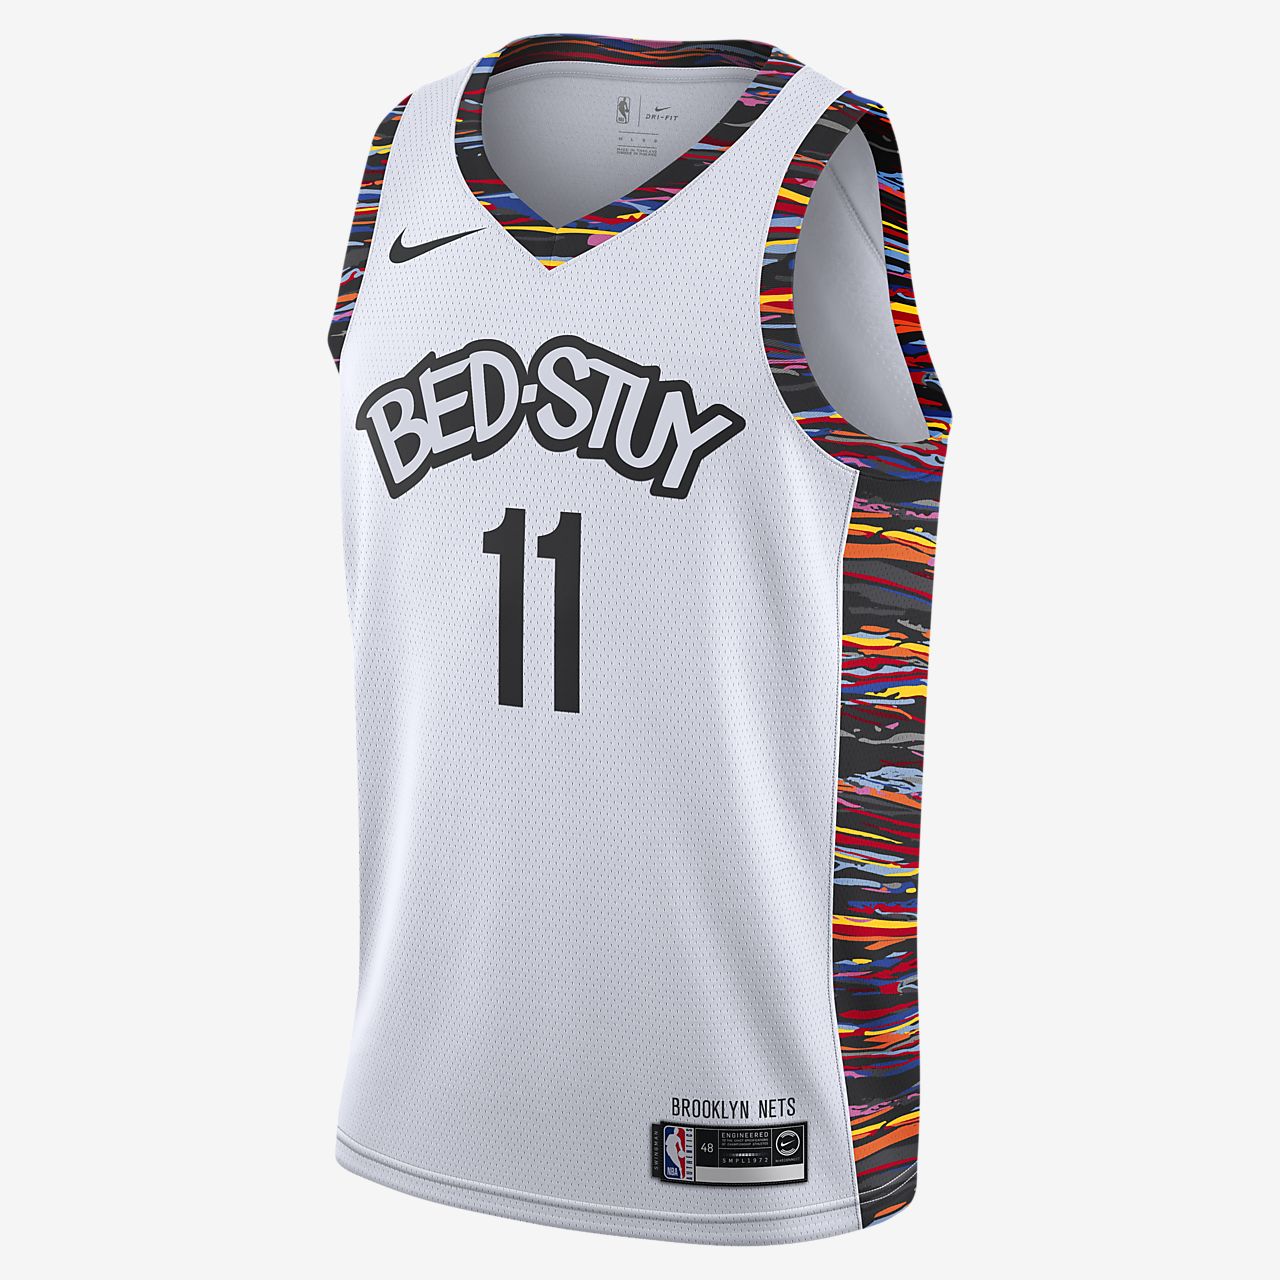 kyrie irving jersey number